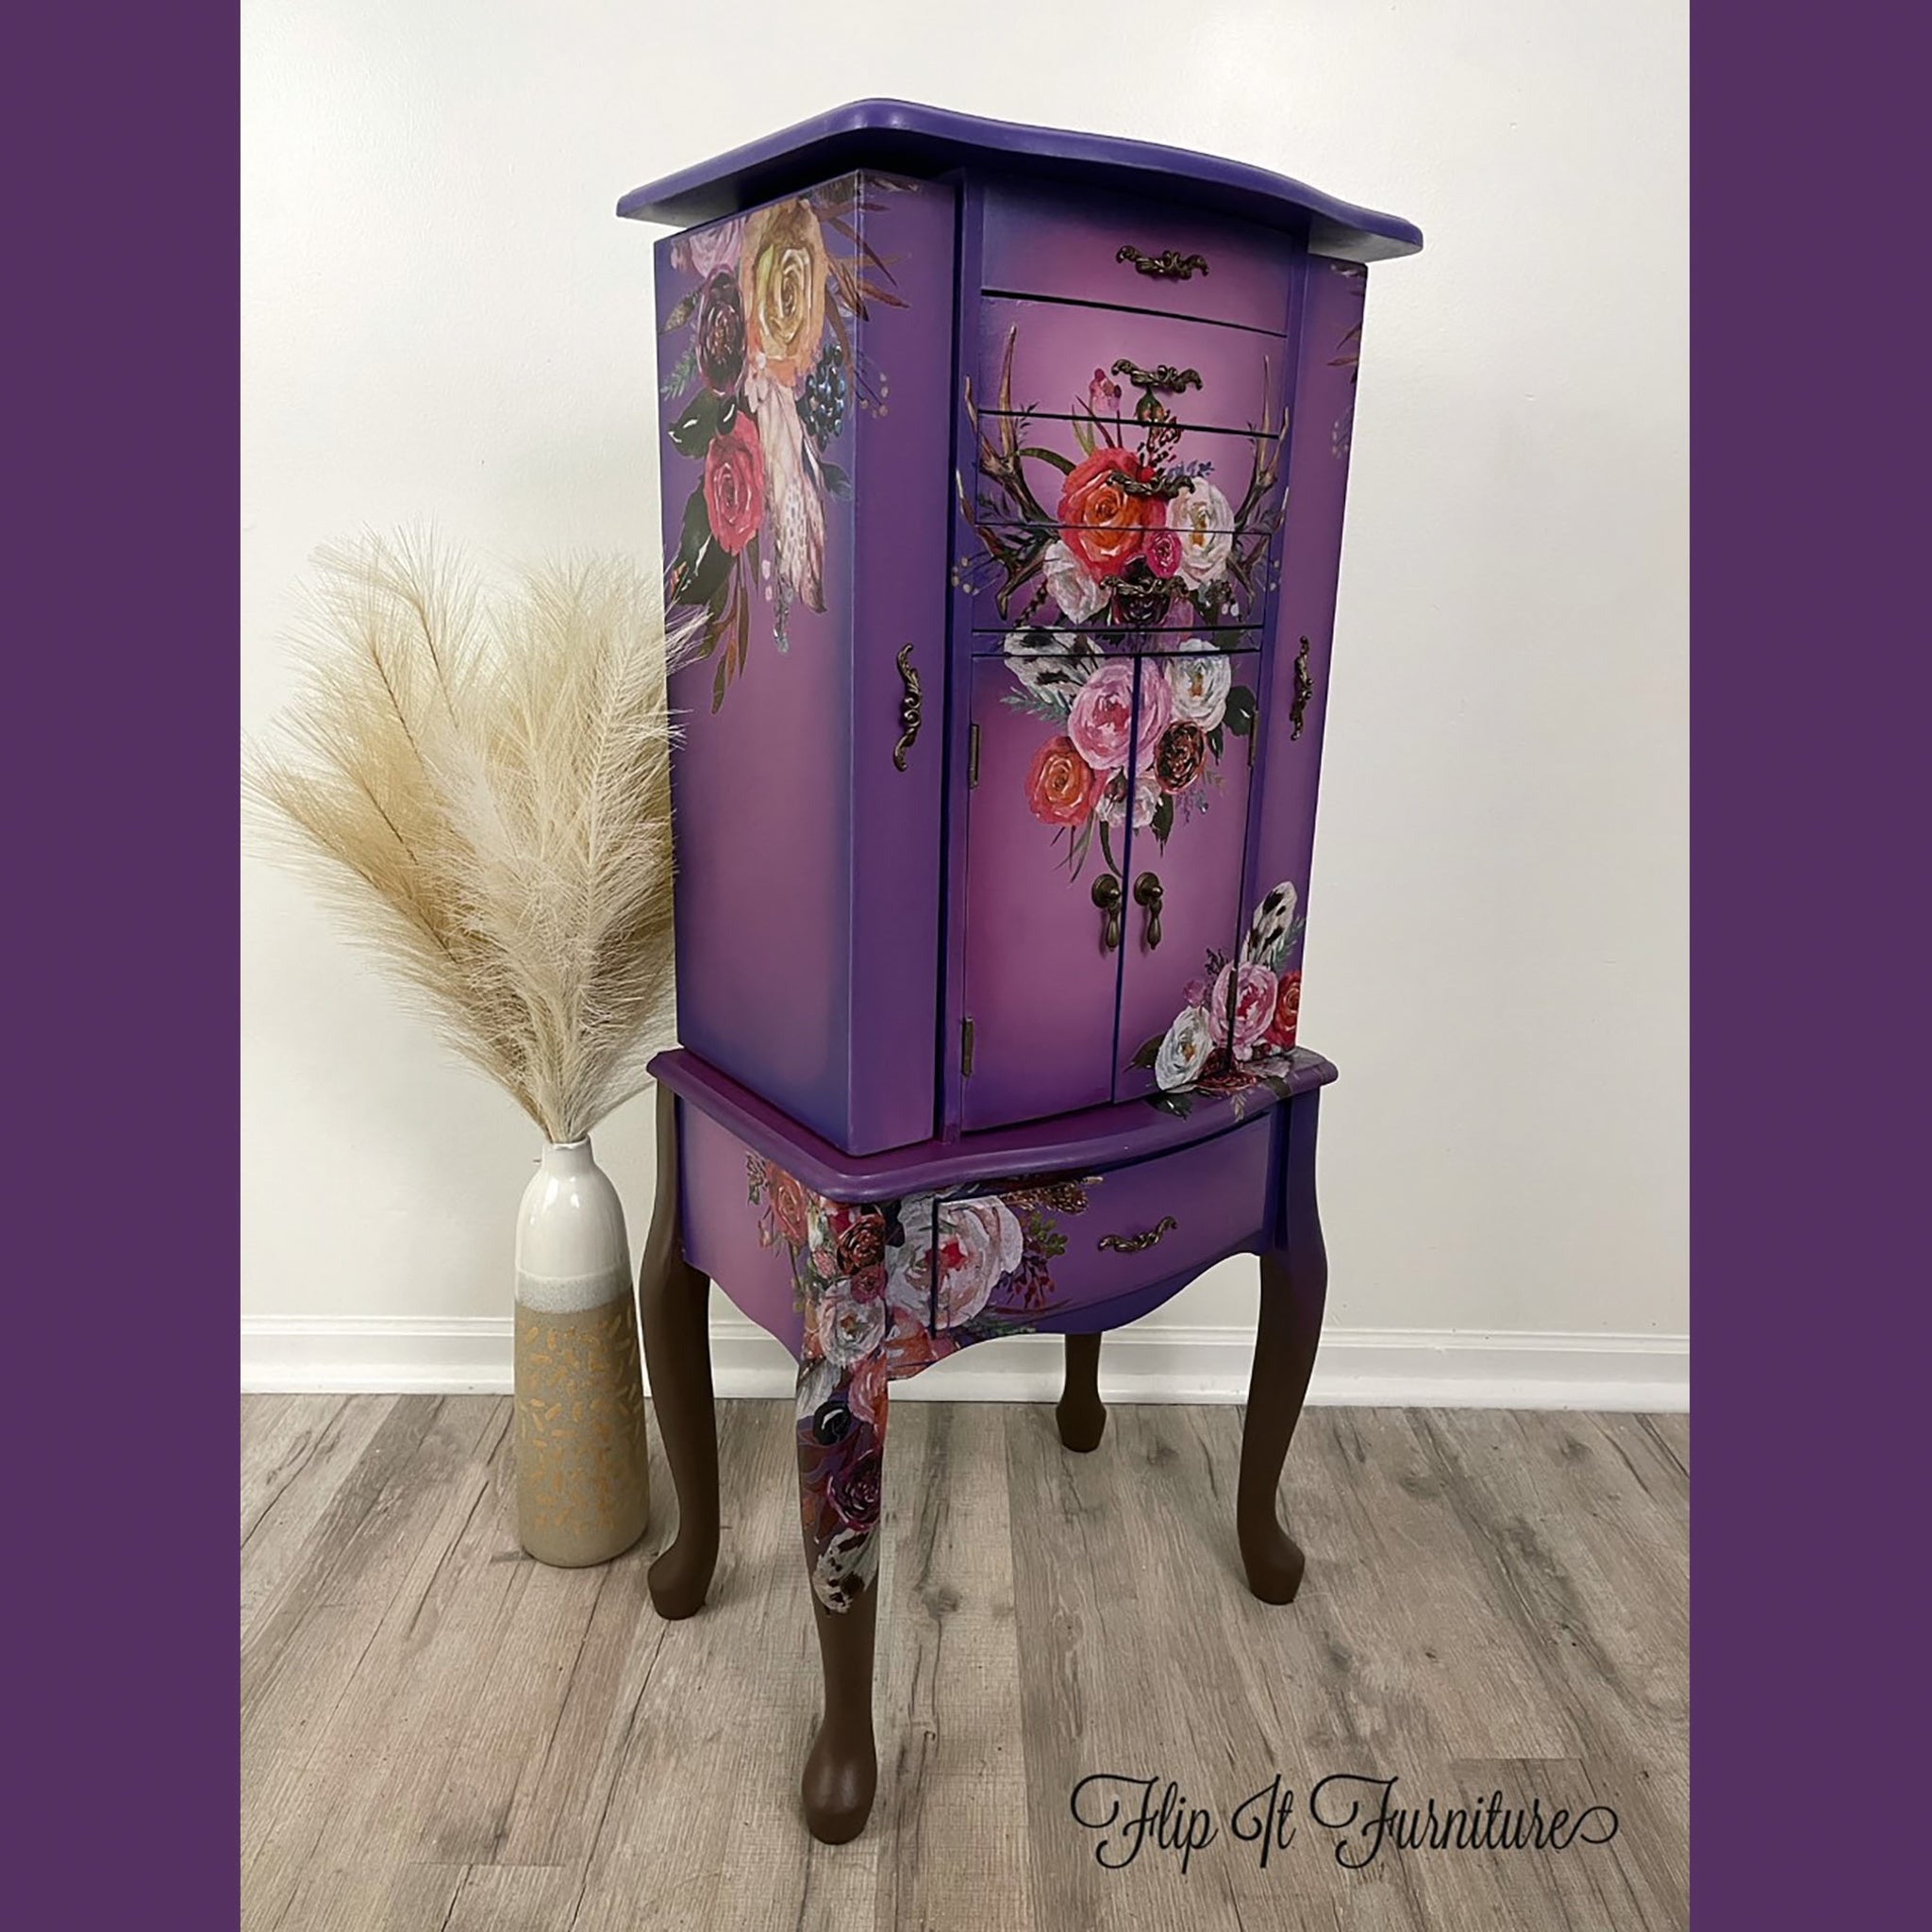 A vintage standing jewelry armoir refurbished by Flip It Furniture is painted in purple with pink center blending and features the Flower Child transfer.